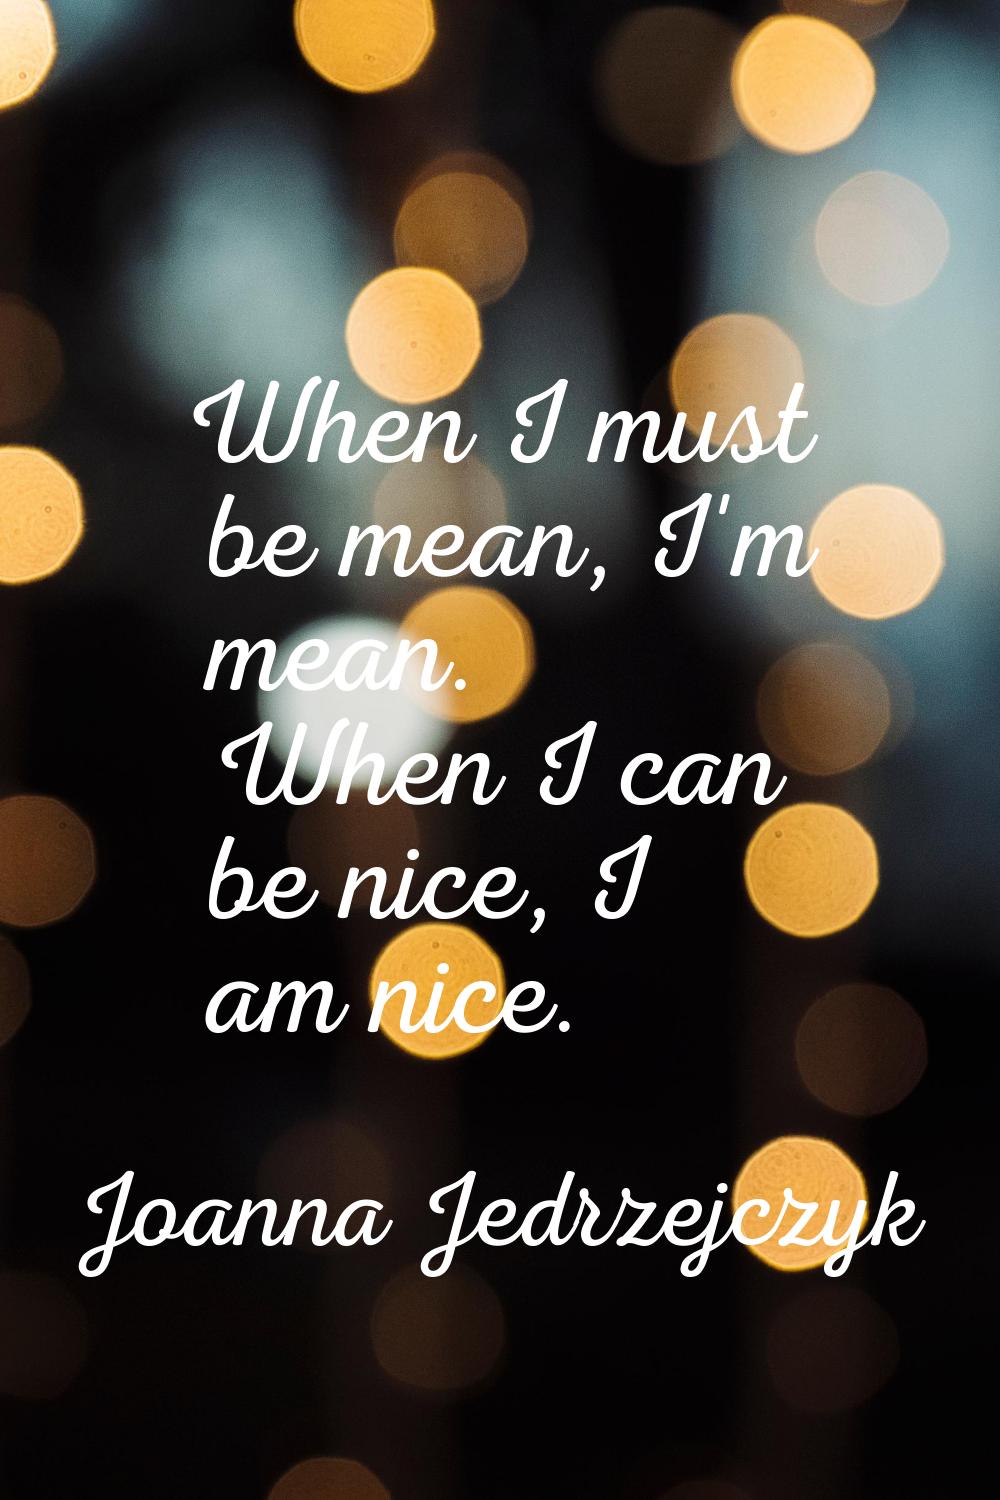 When I must be mean, I'm mean. When I can be nice, I am nice.